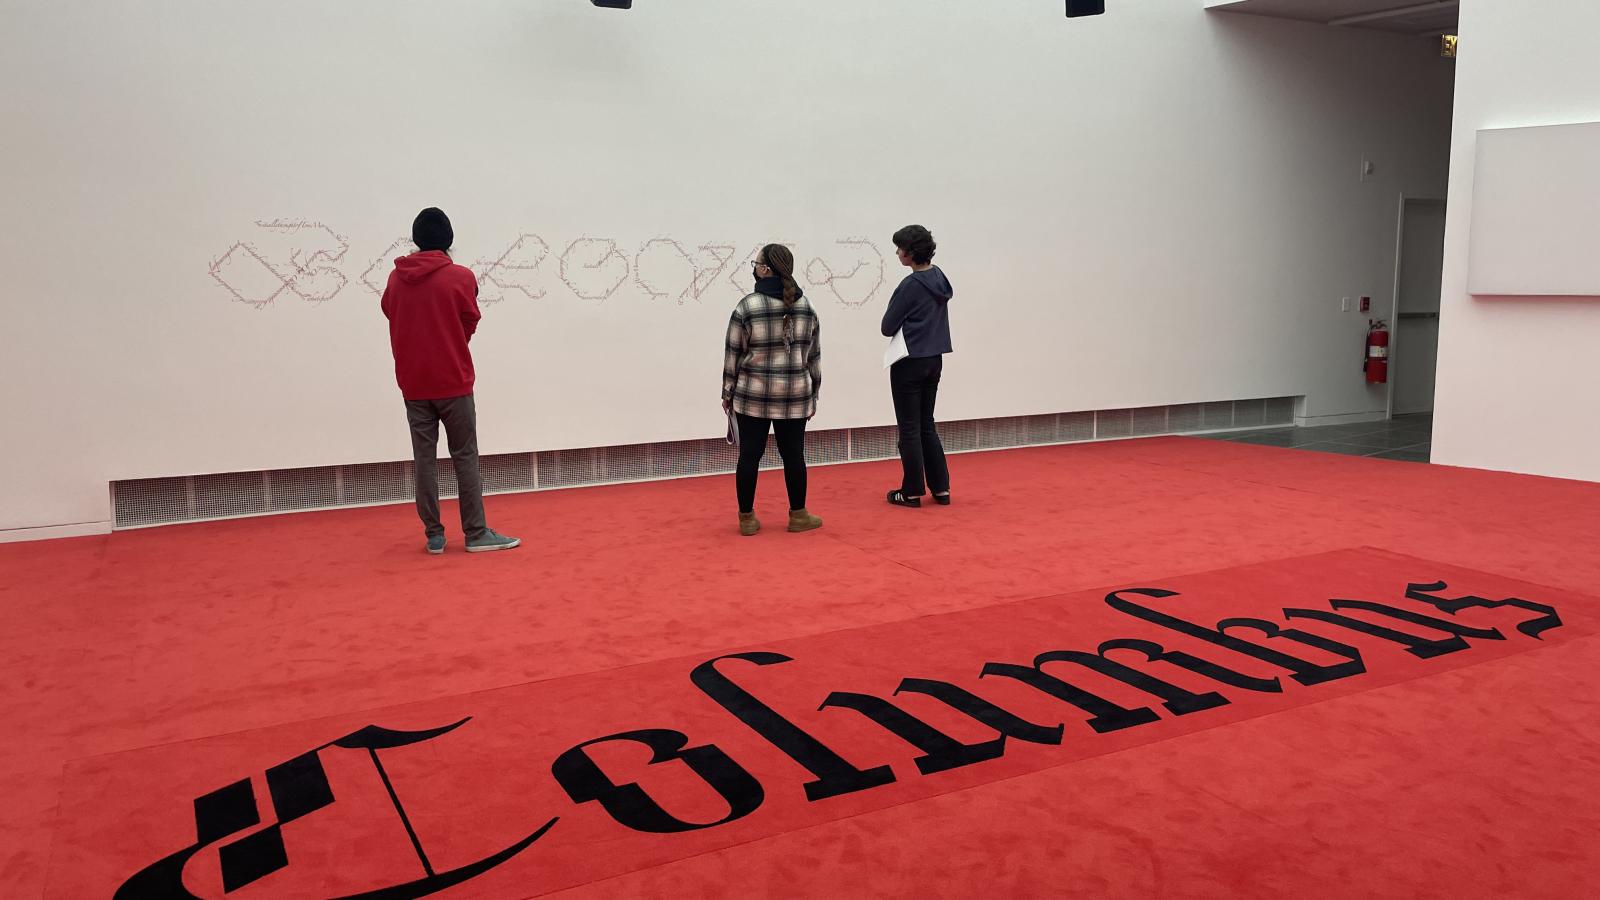 Students observing the artwork in the Wexner Center for the Arts. 